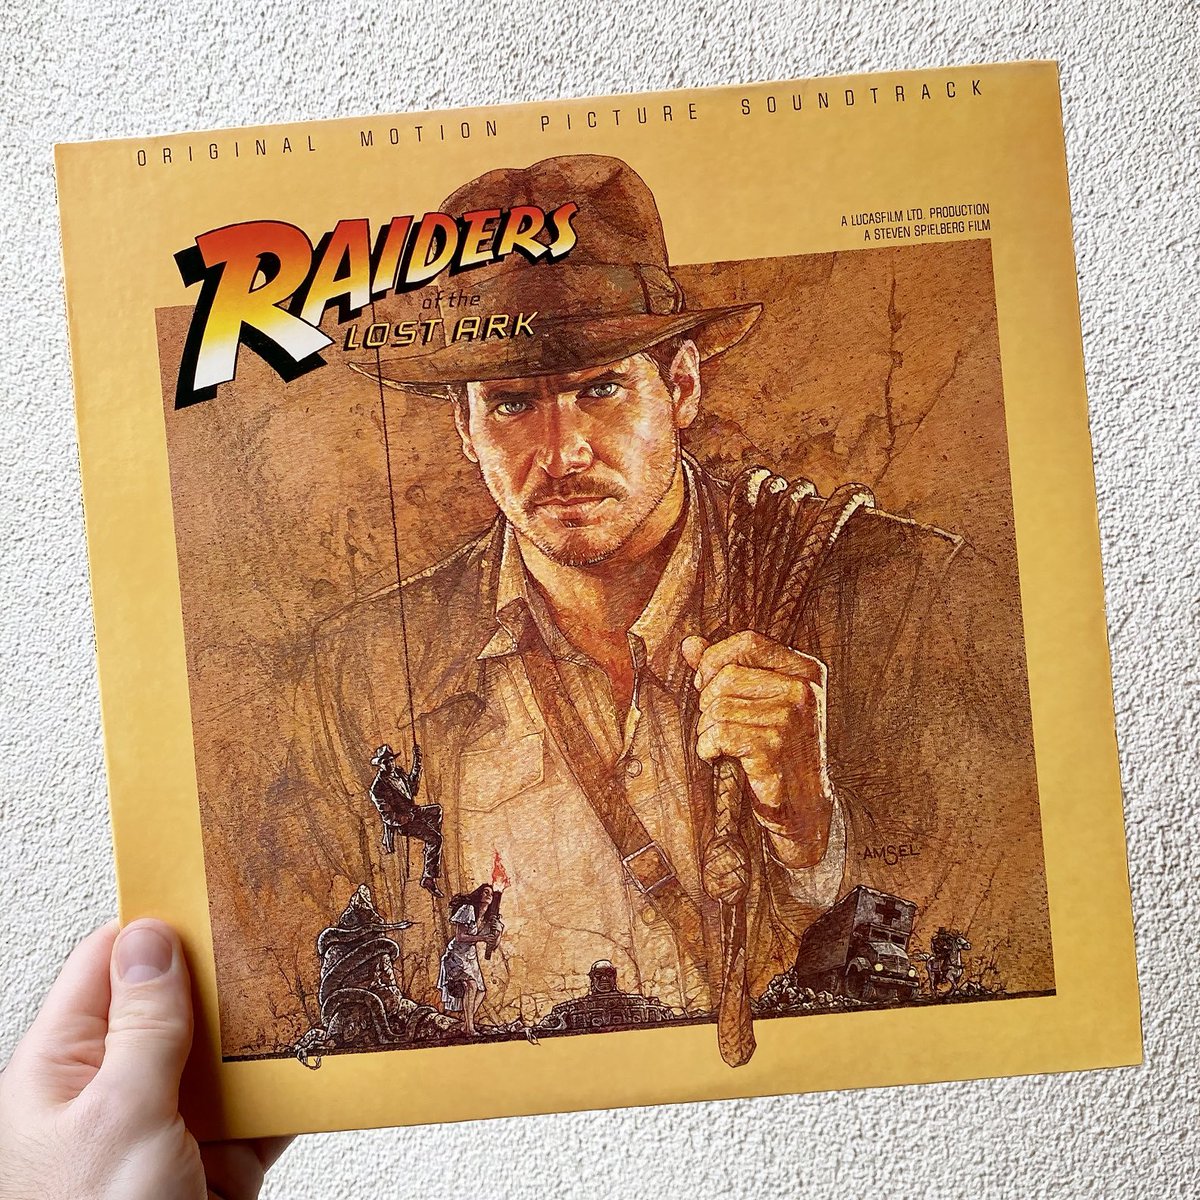 Raiders Of The Lost Ark - Original Motion Picture Soundtrack (1981)

#collectxdestroy #toys #toycollector #actionfigures #film #comics #vinyl #vinylrecords #recordcollector #vintage #80s #tmnt #marvel #horror #starwars #straightedge #metal #thatmetalshow #podcast #hiphop